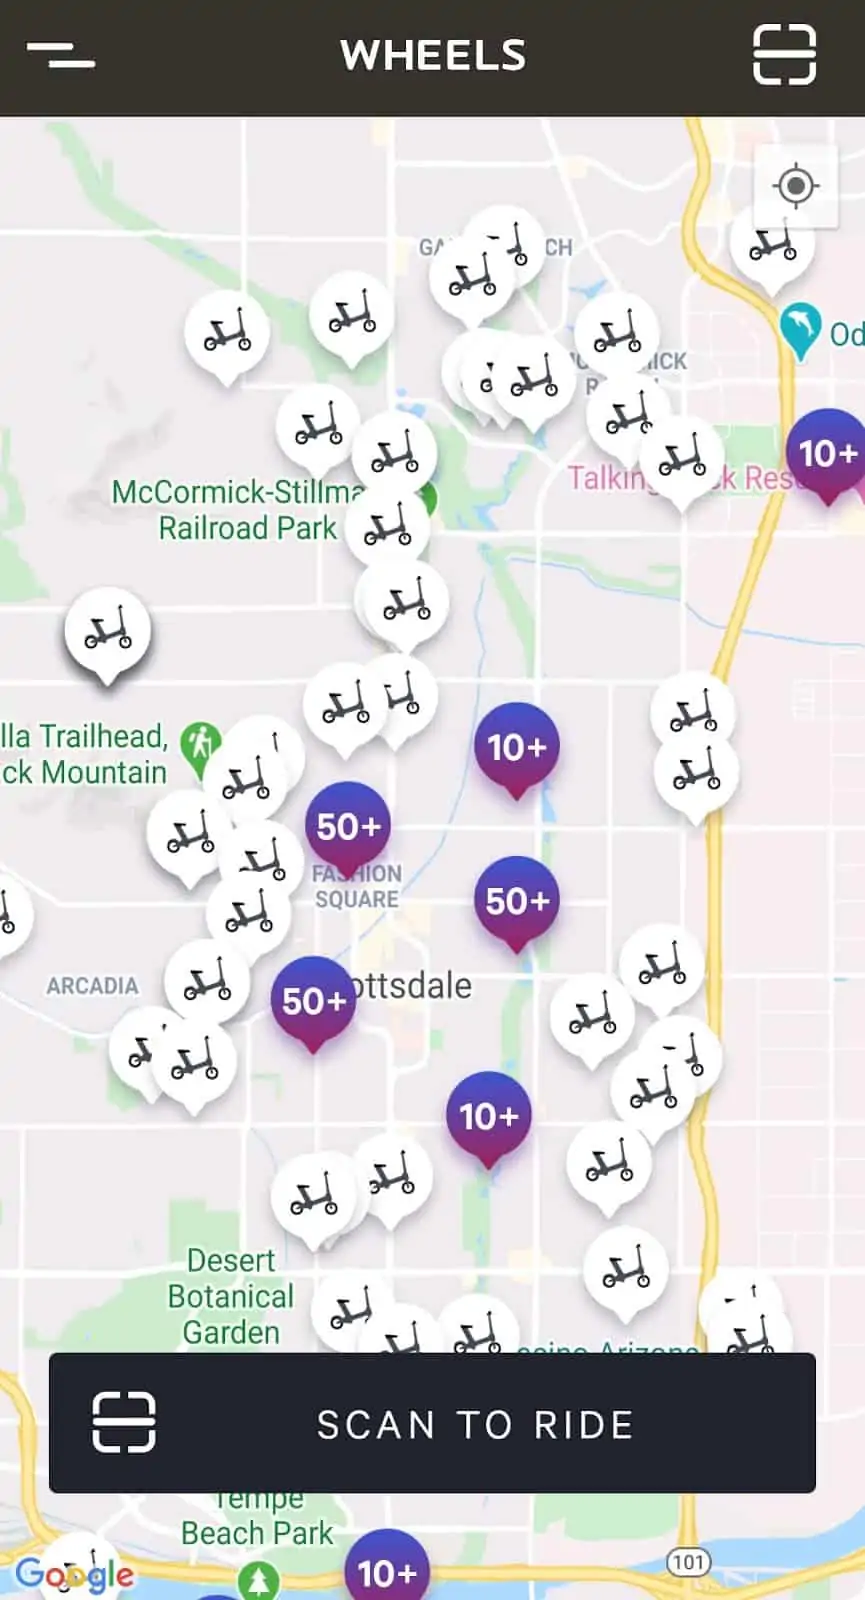 The map of nearby bikes on the Wheels Scooter app